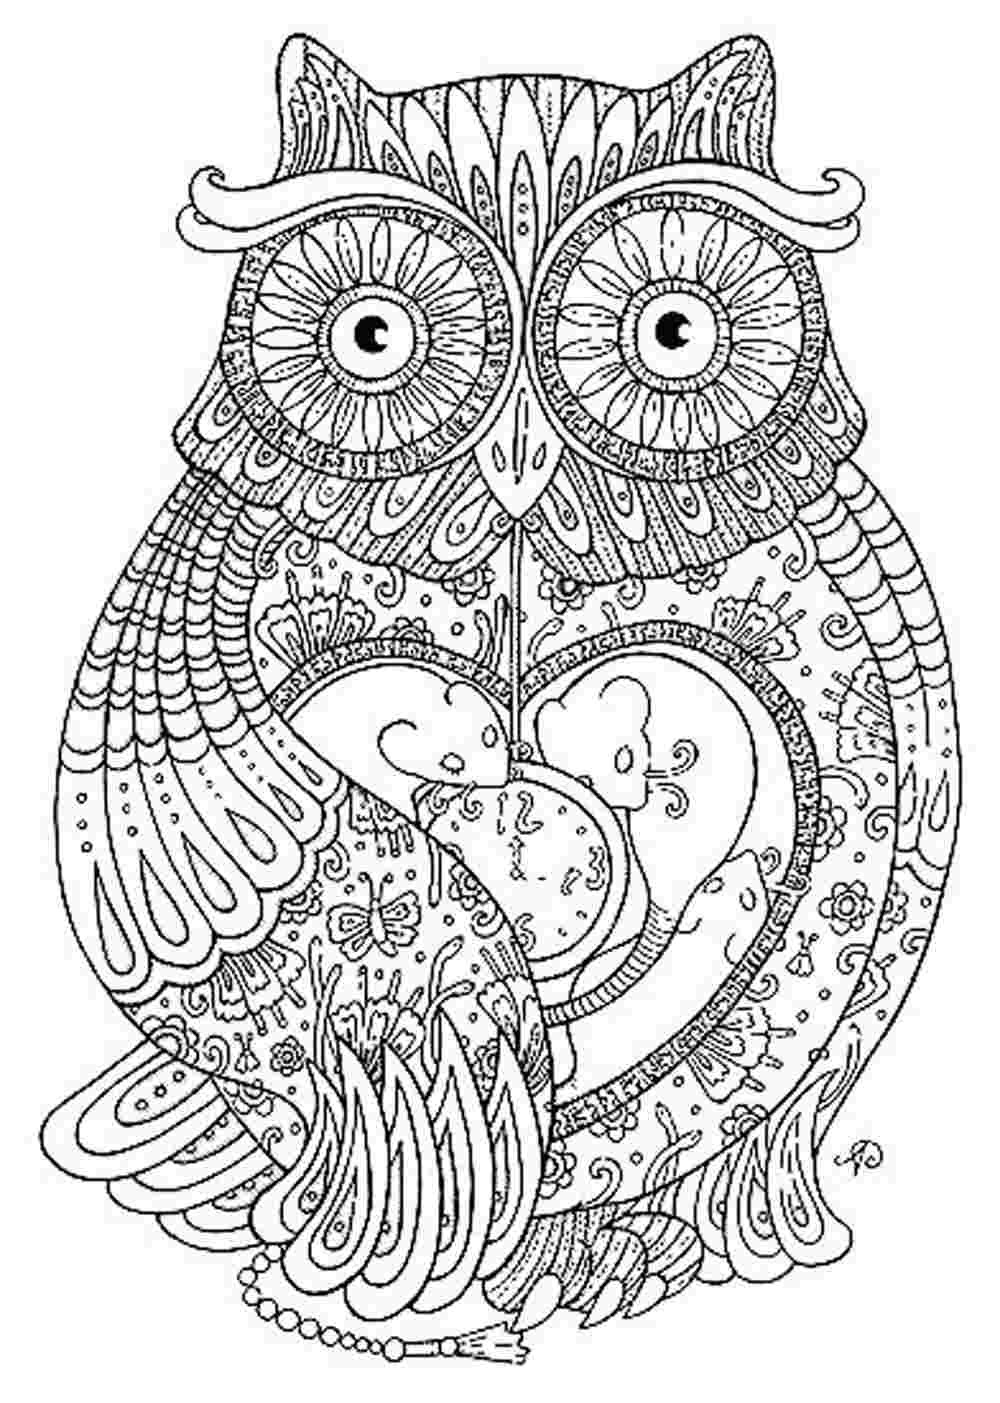 Adult Coloring Pages Owl
 Cute Owl Coloring Page 5599 Bestofcoloring